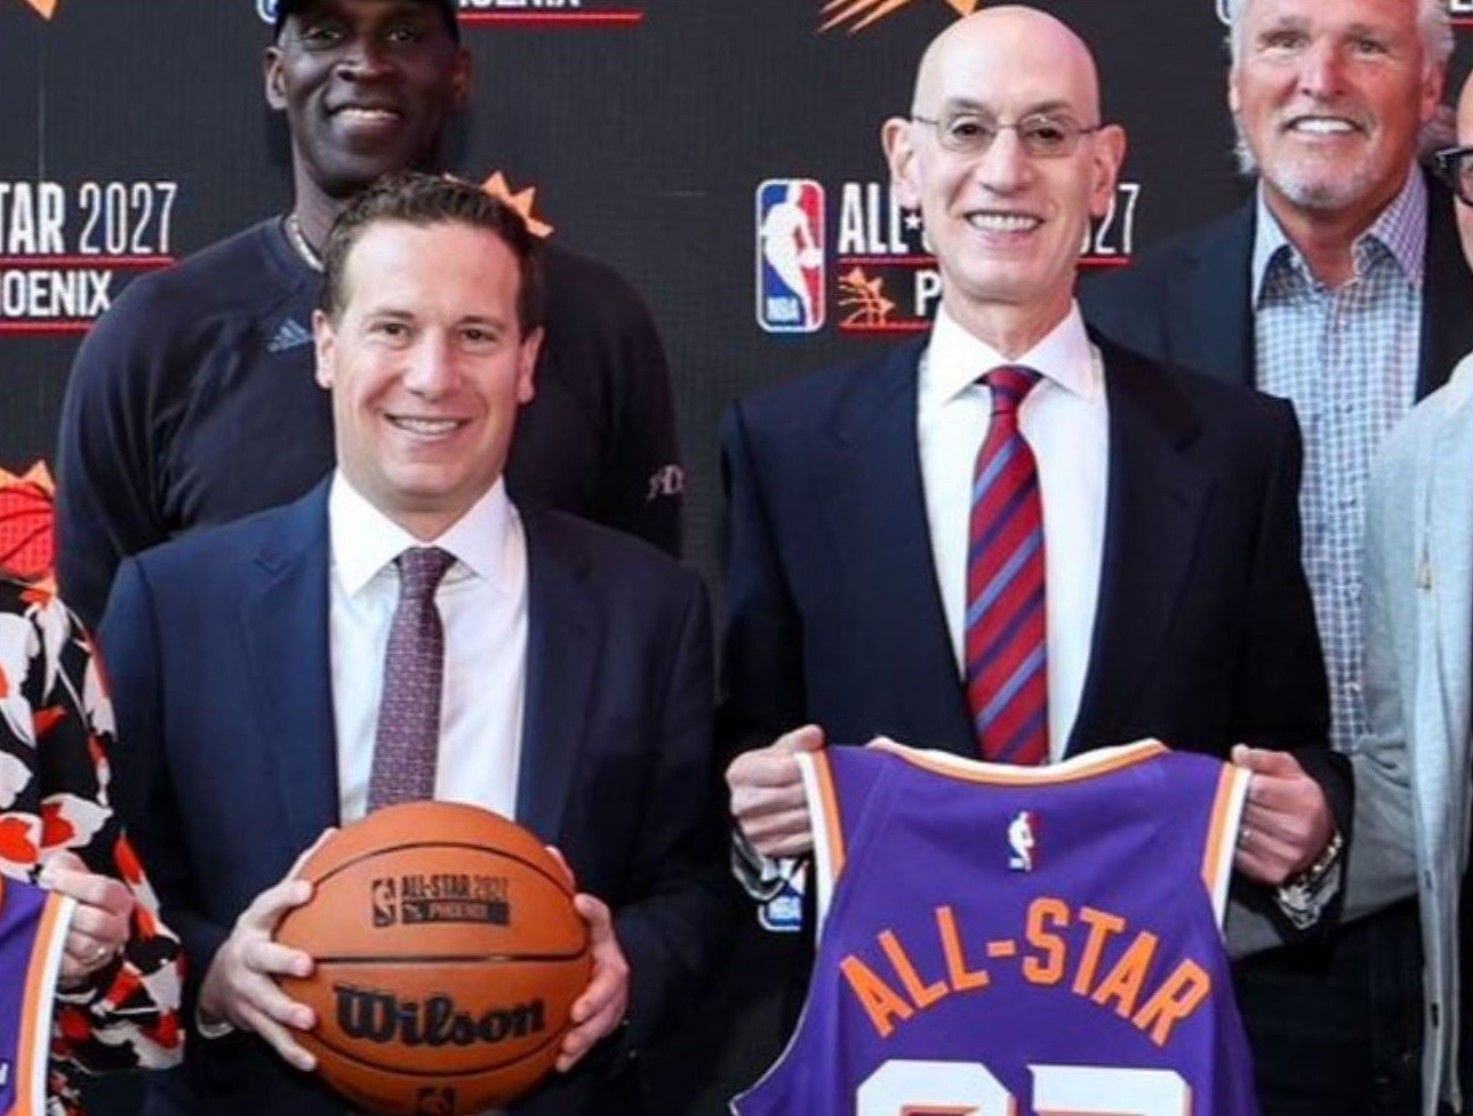 NBA Commissioner Adam Silver (R) alarms Phoenix Suns owner Mat Ishbia (L) about regulations in place following roster splurge.